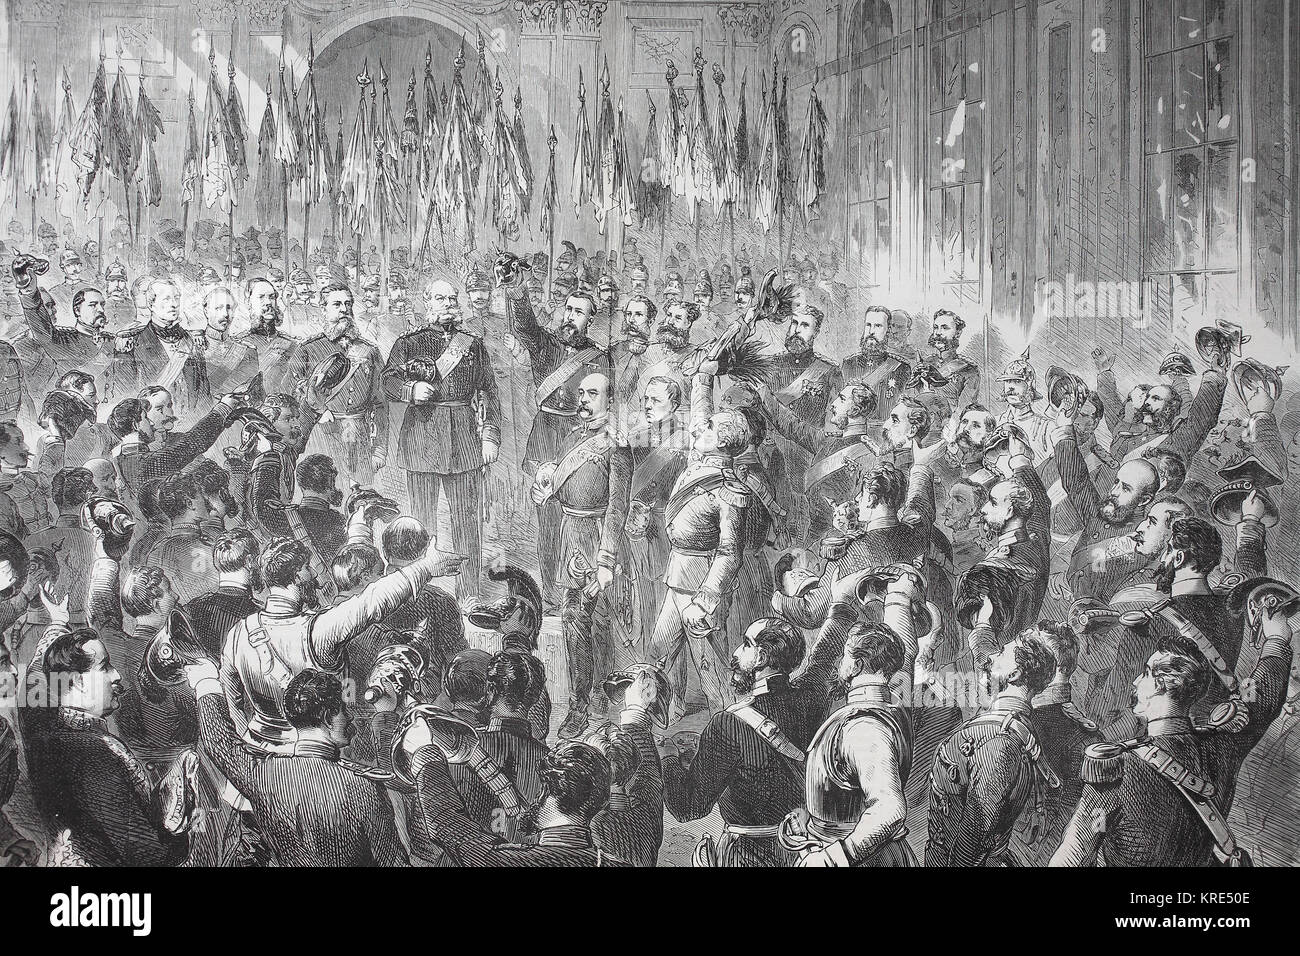 The Proclamation of the German Empire in the Mirror Gallery in the Palace of Versailles on January 18, 1871, France, in the Franco-Prussian War of 187 Stock Photo